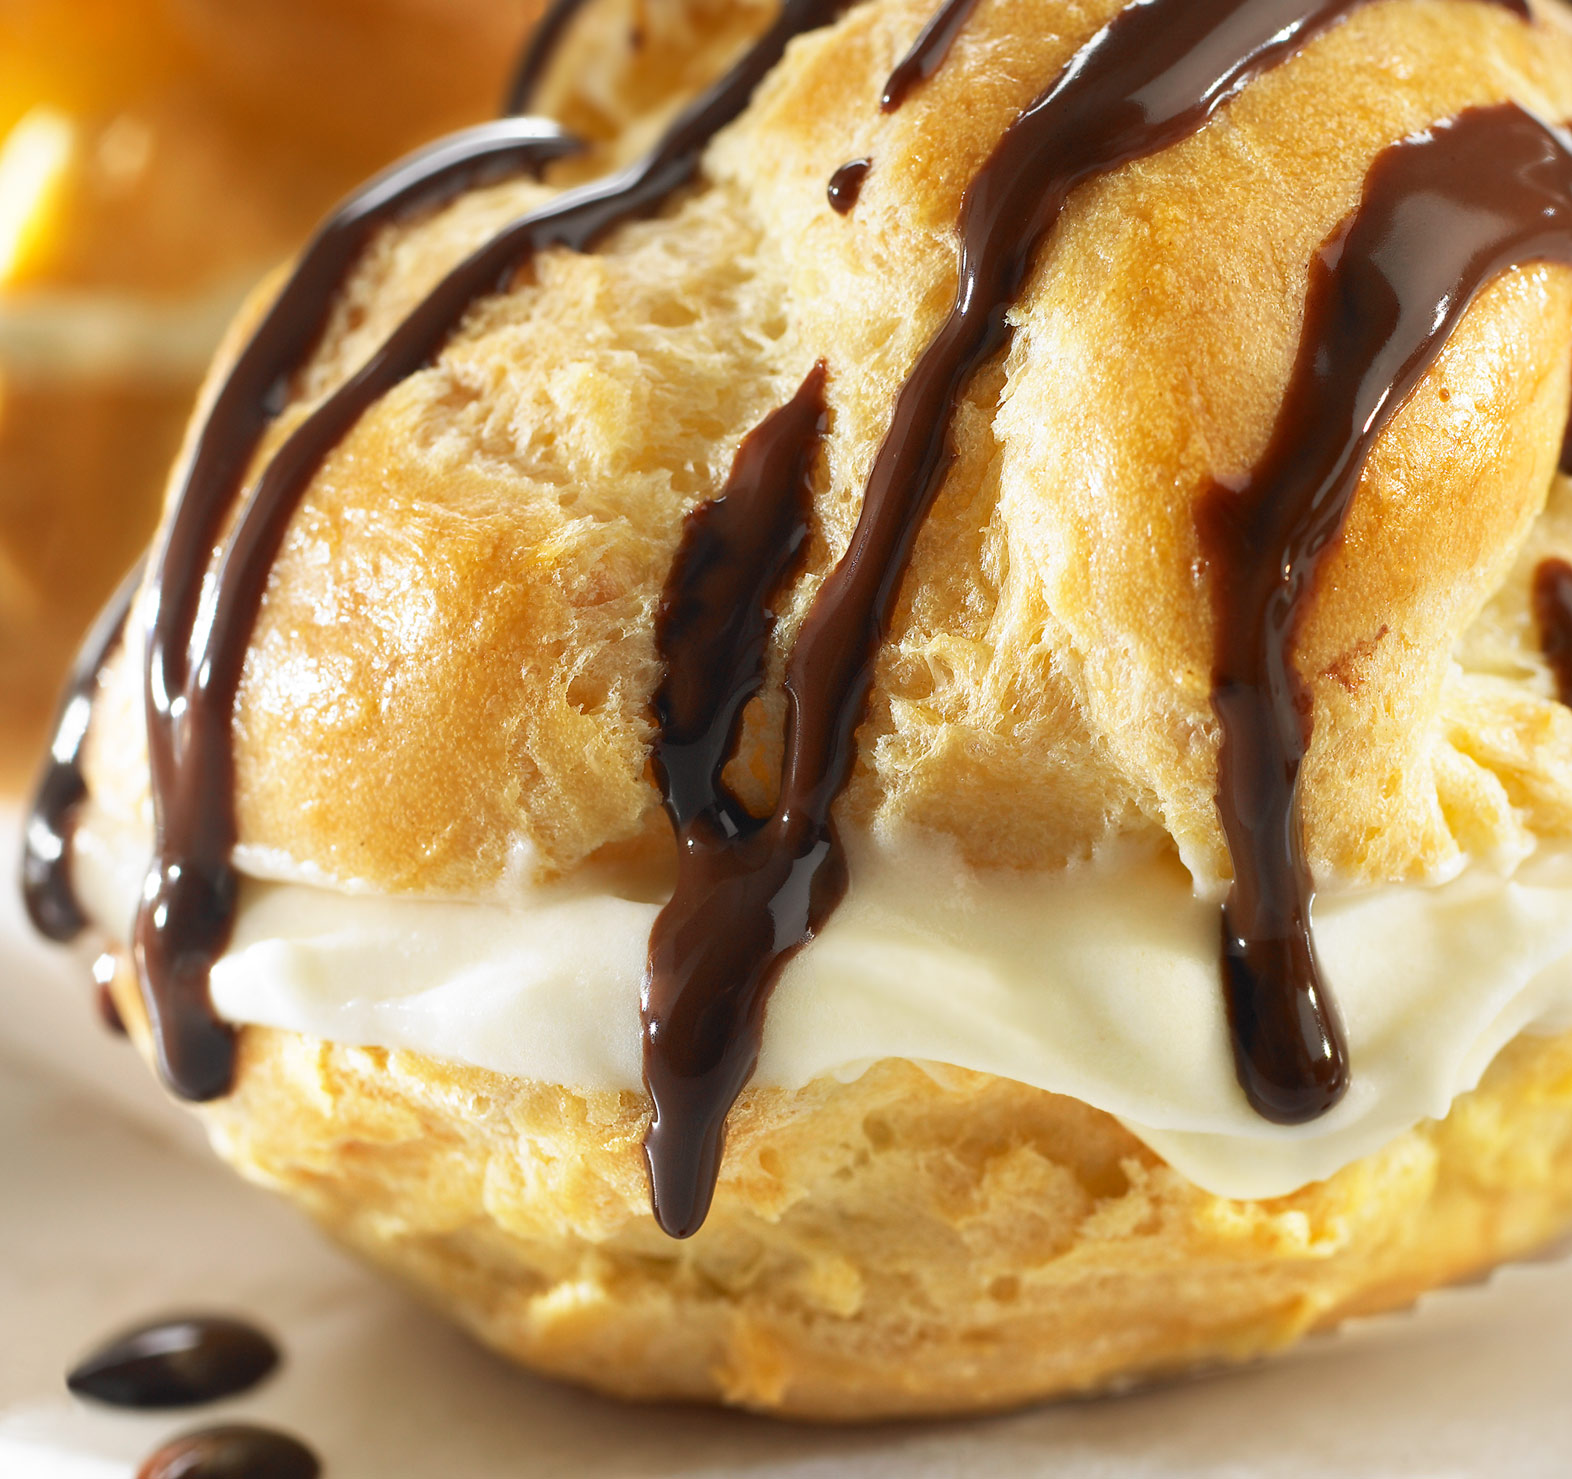 Glasshouse Assignment - David Bishop - Food Photography - Creme Puff with Chocolate Sauce